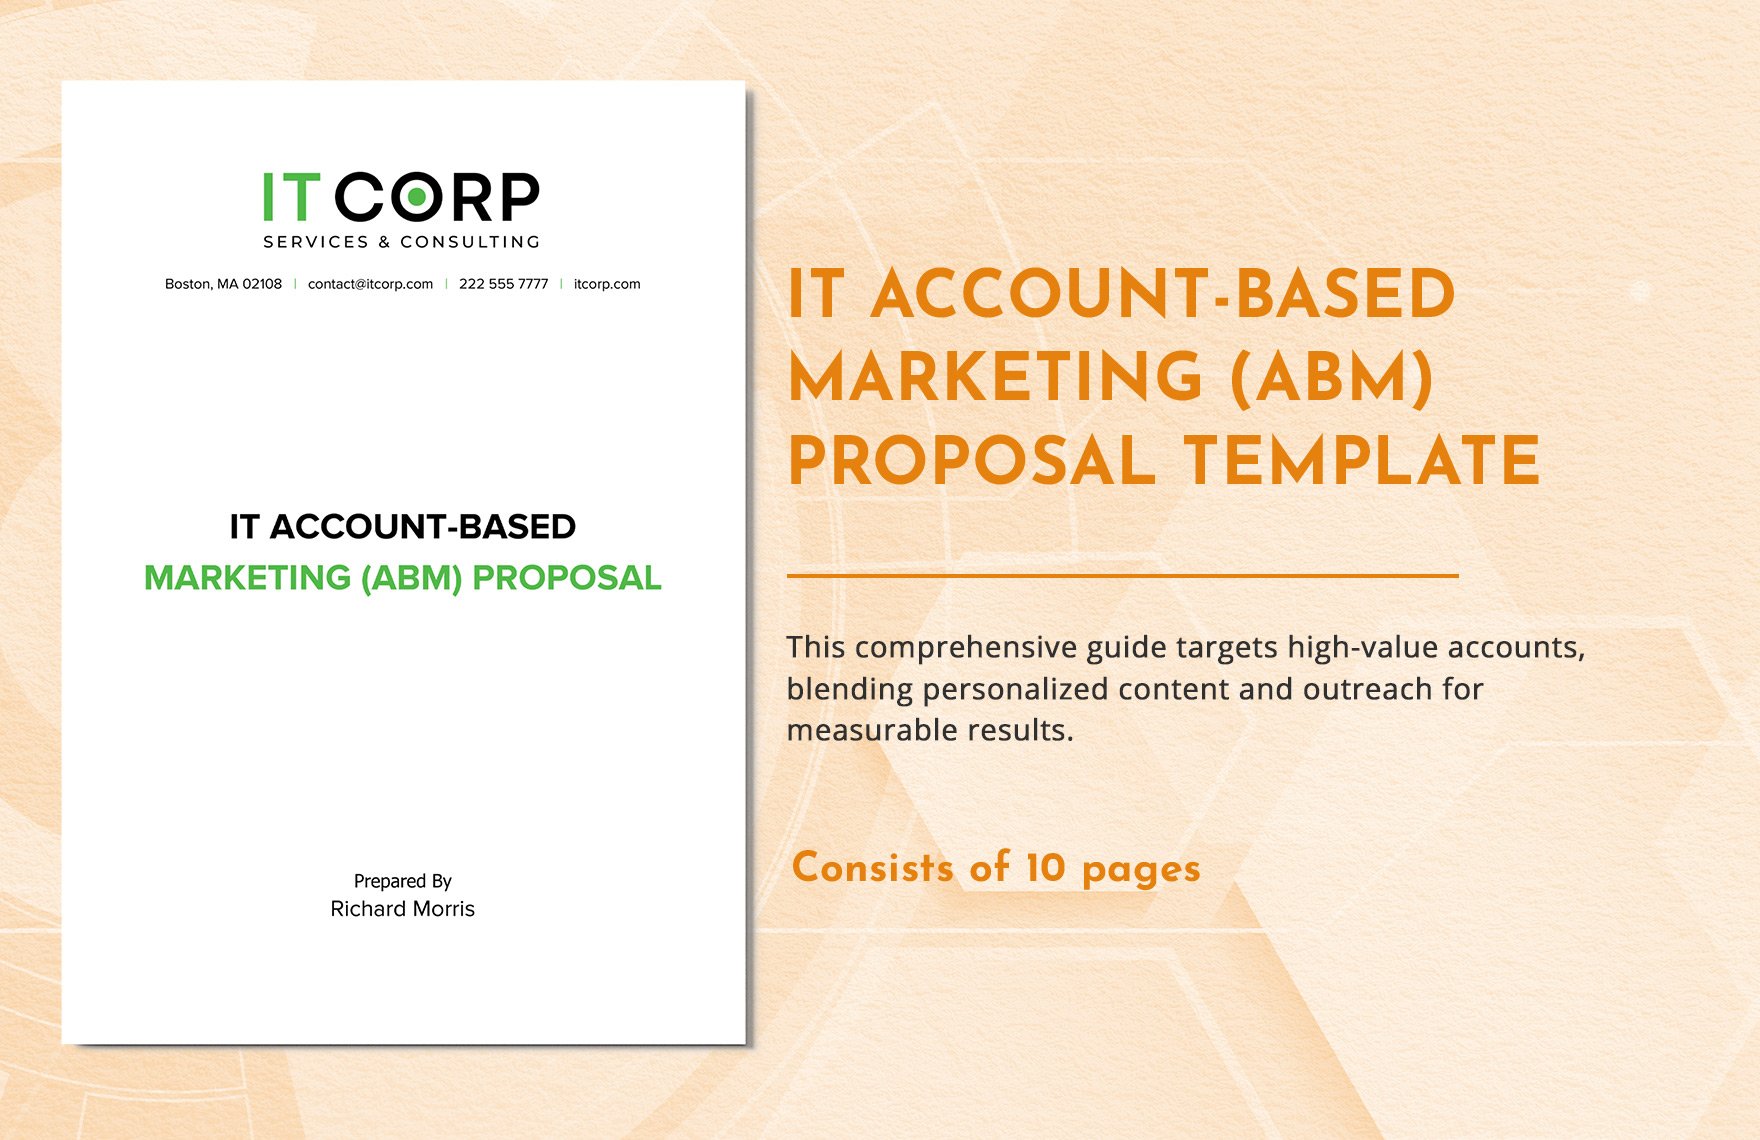 IT Account-Based Marketing (ABM) Proposal Template in Word, Google Docs, PDF